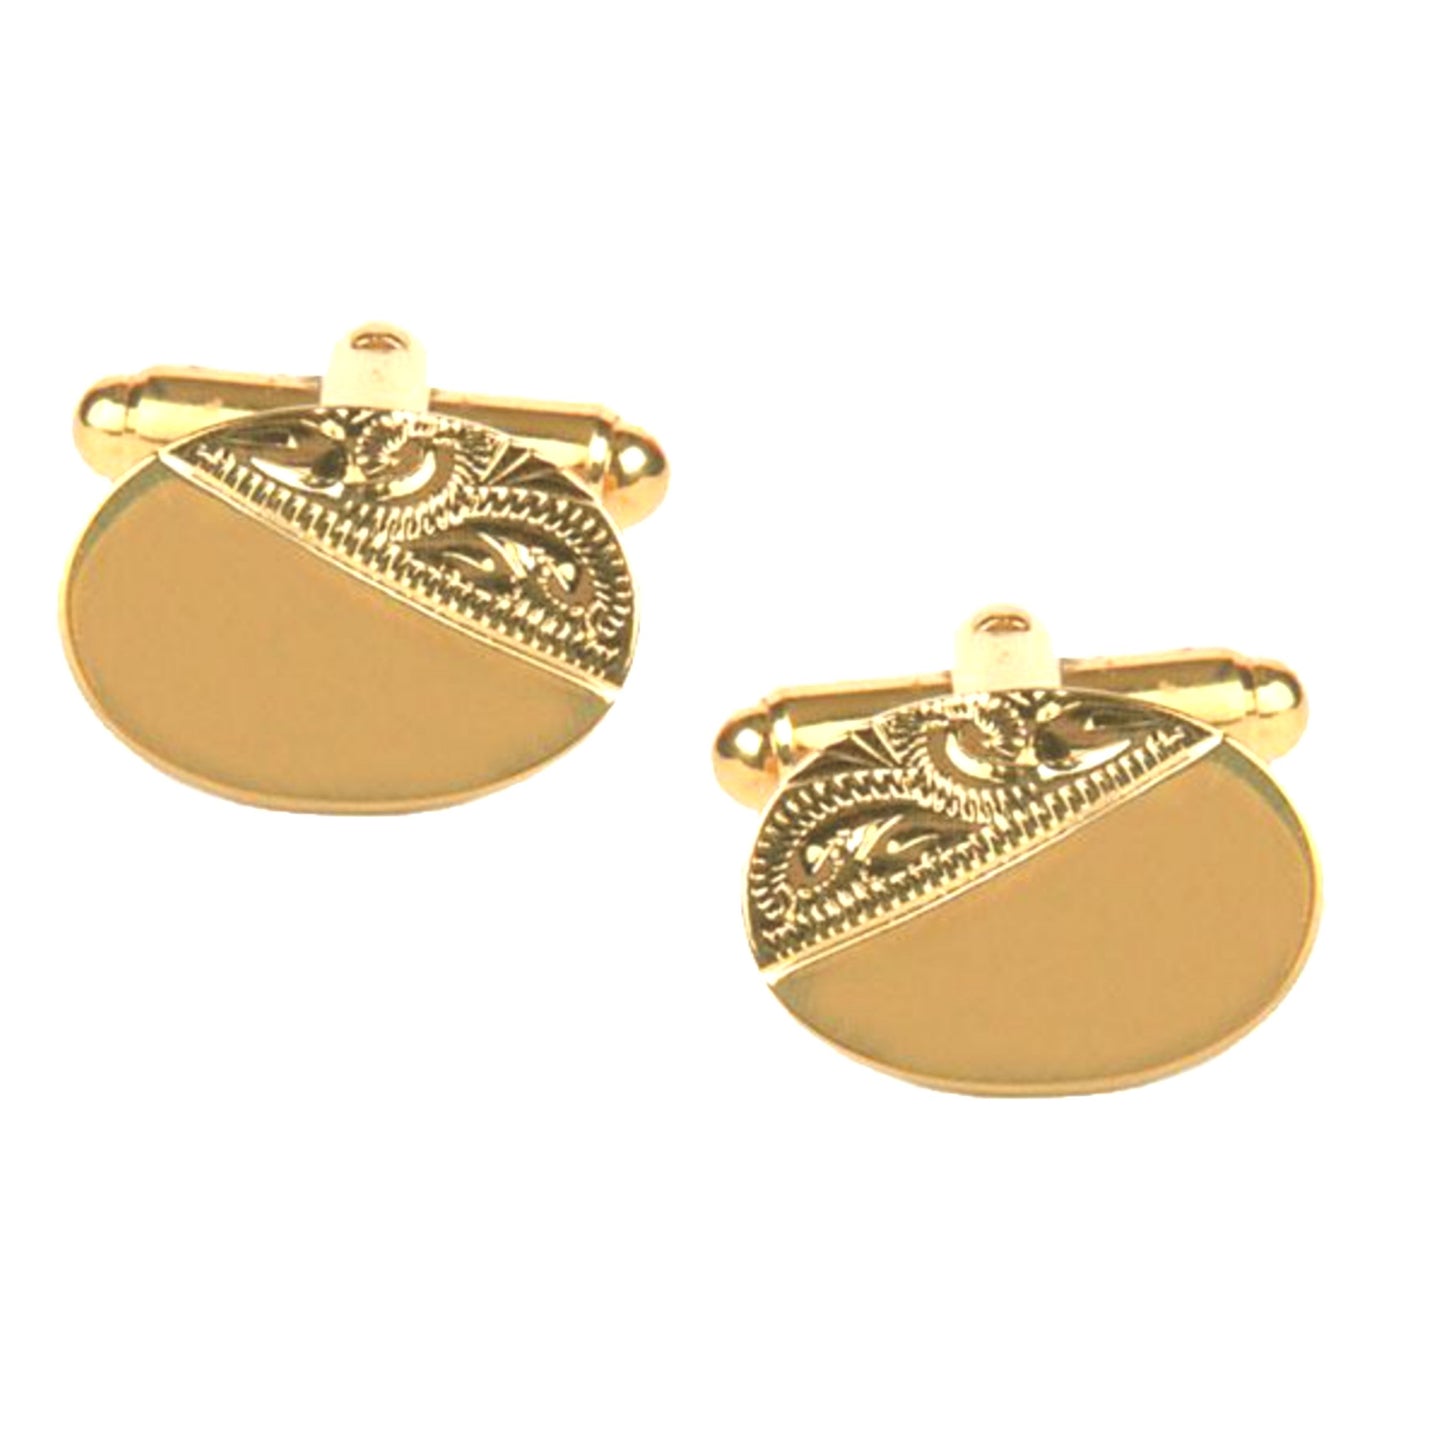 Oval 1/3 Engraved Design Gold Plated Cufflinks - HK Jewels